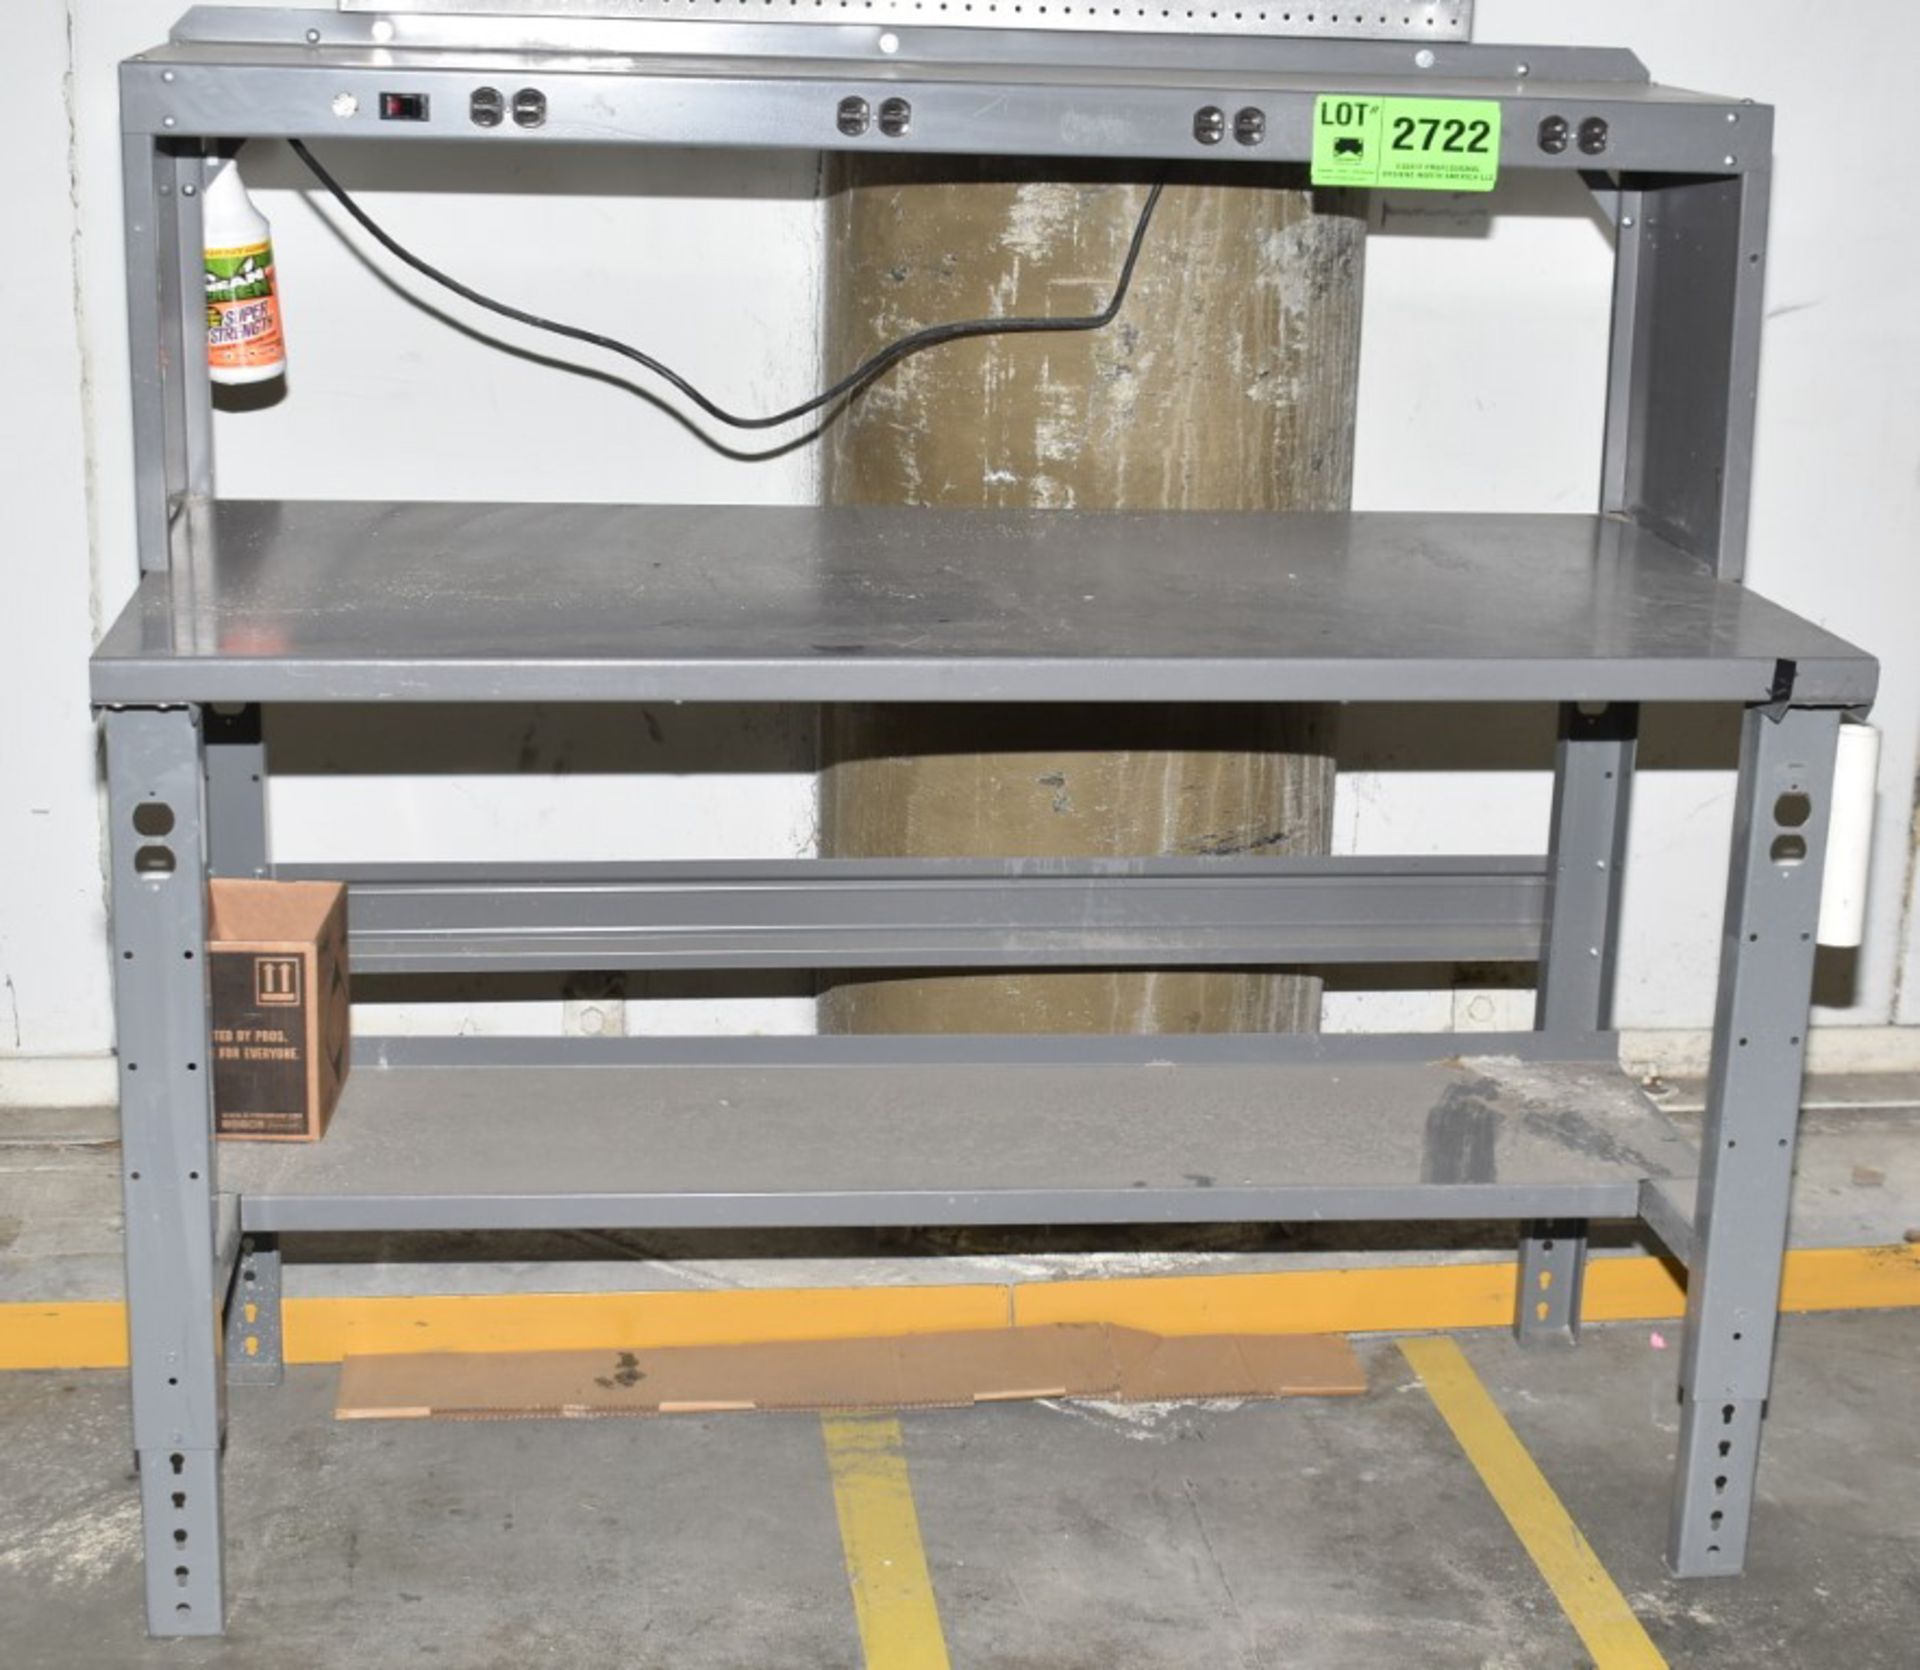 STEEL WORK BENCH WITH POWER [RIGGING FEES FOR LOT #2722 - $25 USD PLUS APPLICABLE TAXES]